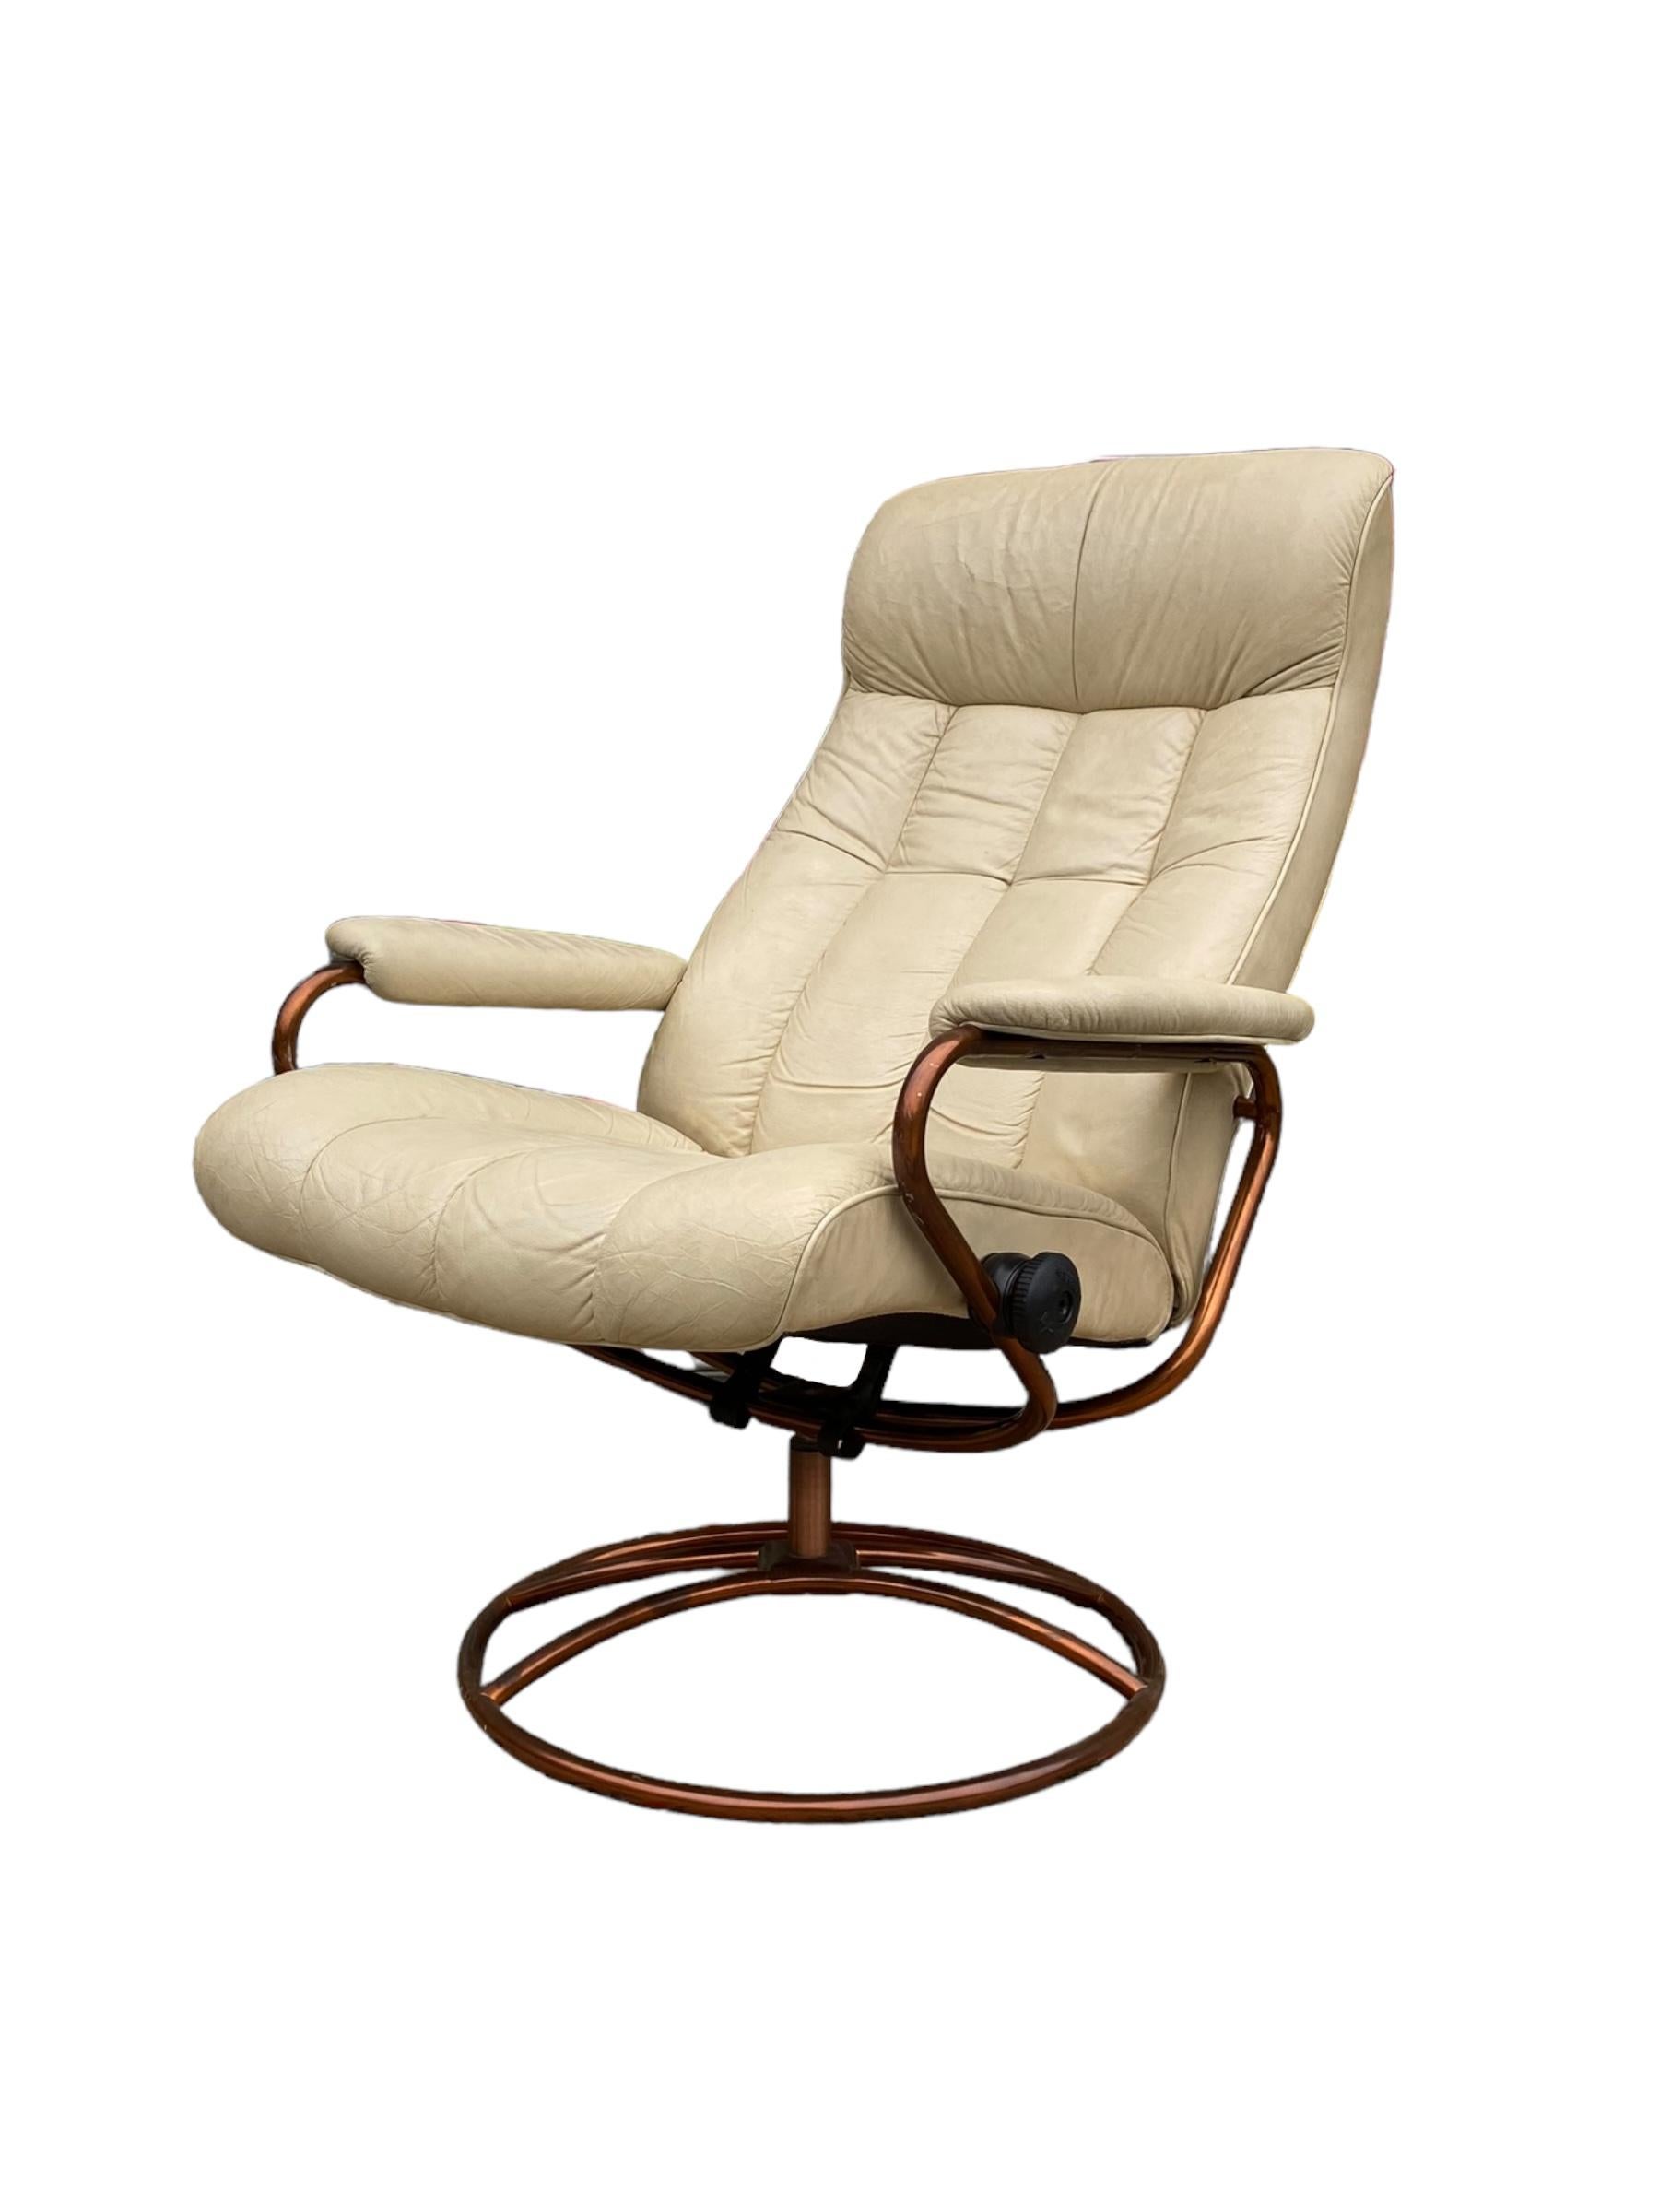 Scandinavian Modern Post Modern Stressless Lounge Chair and Ottoman with copper frame For Sale